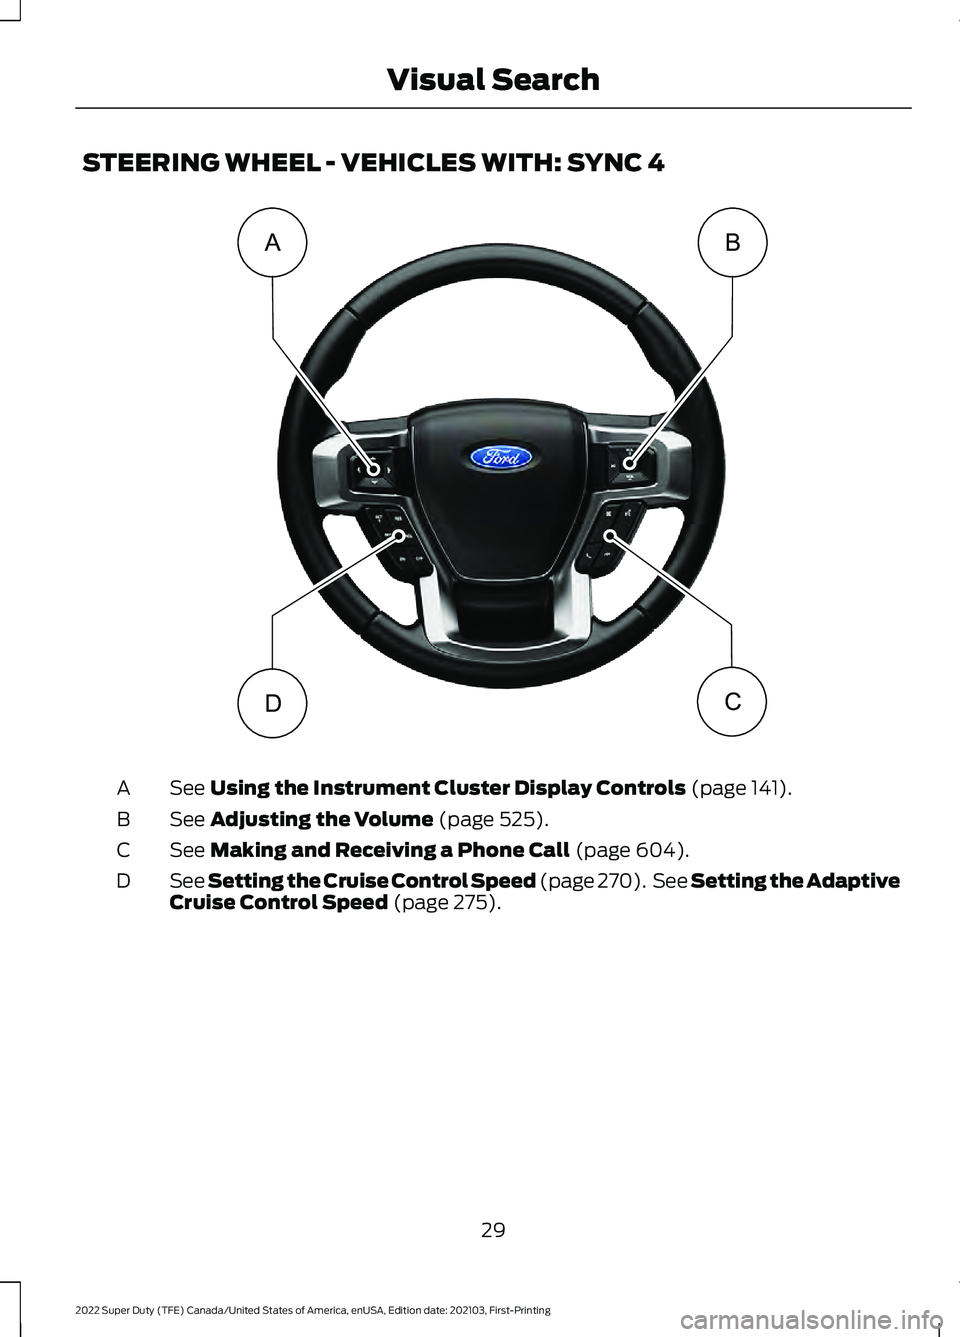 FORD F-250 2022  Owners Manual STEERING WHEEL - VEHICLES WITH: SYNC 4
See Using the Instrument Cluster Display Controls (page 141).
A
See 
Adjusting the Volume (page 525).
B
See 
Making and Receiving a Phone Call (page 604).
C
See 